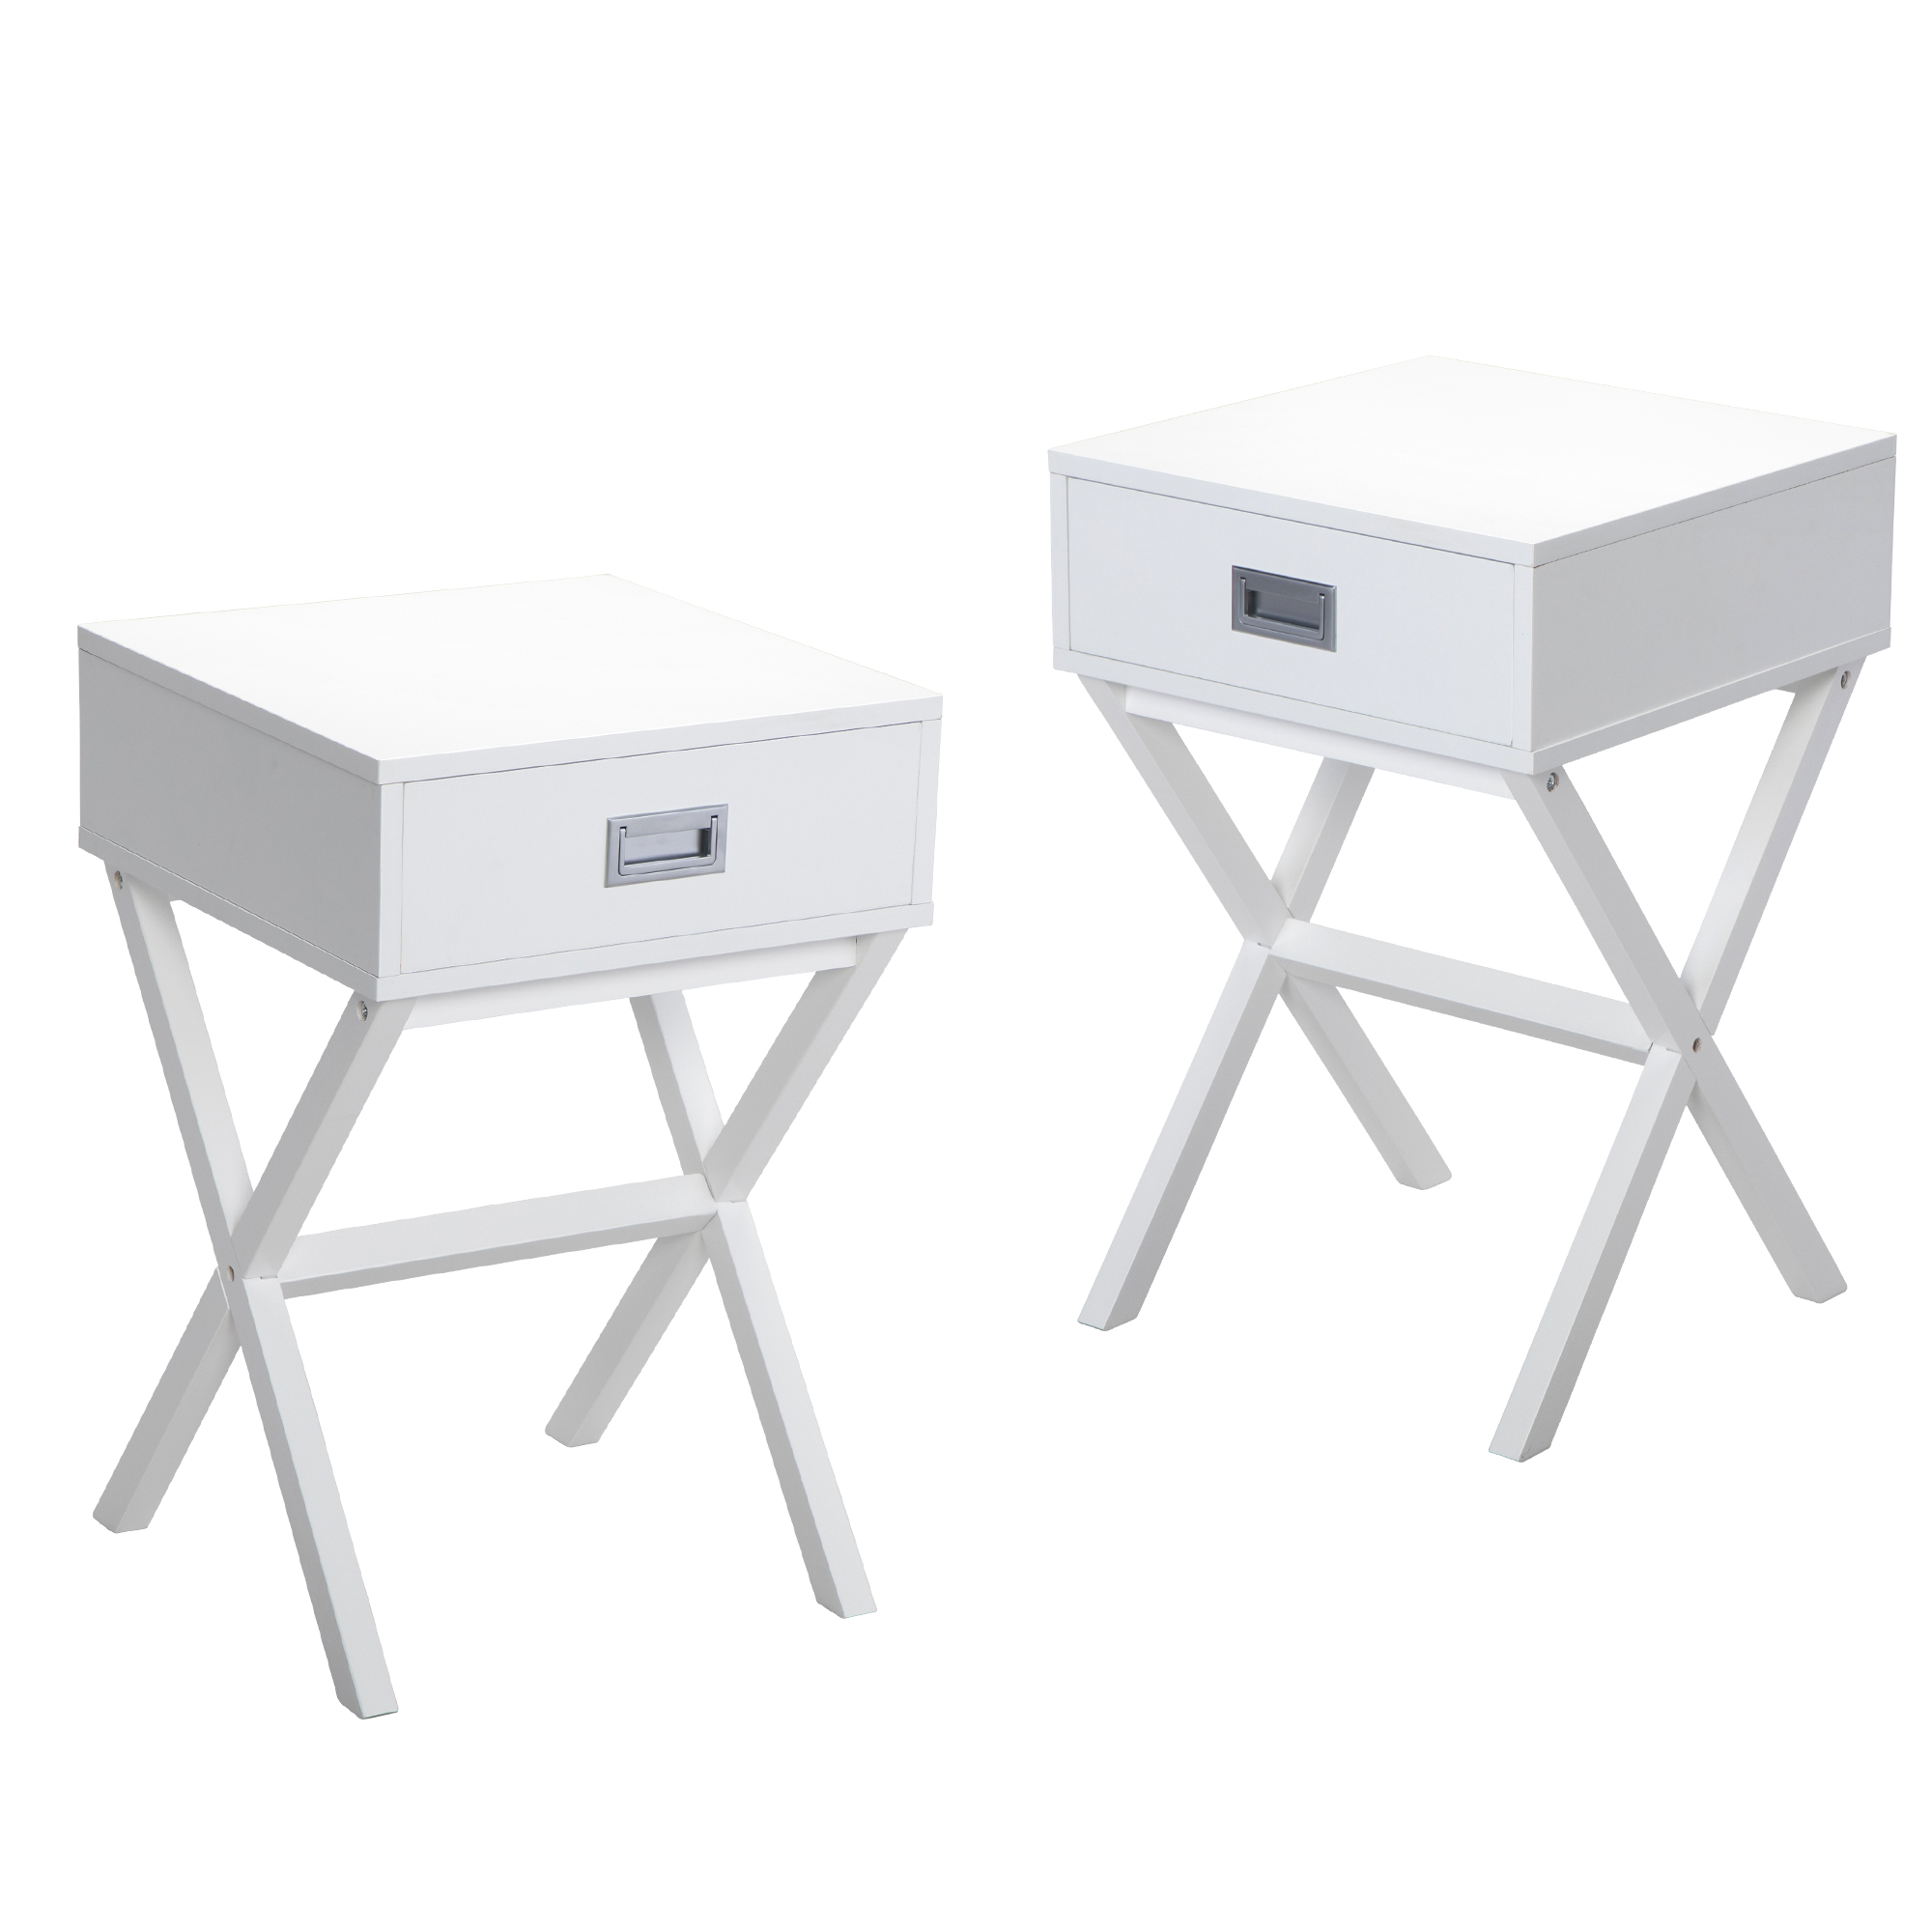 Set of 2 Wooden Nightstand, X-Shaped Sofa Side Table, End Table with Drawer, Bedroom Living Room Furniture,White-CASAINC